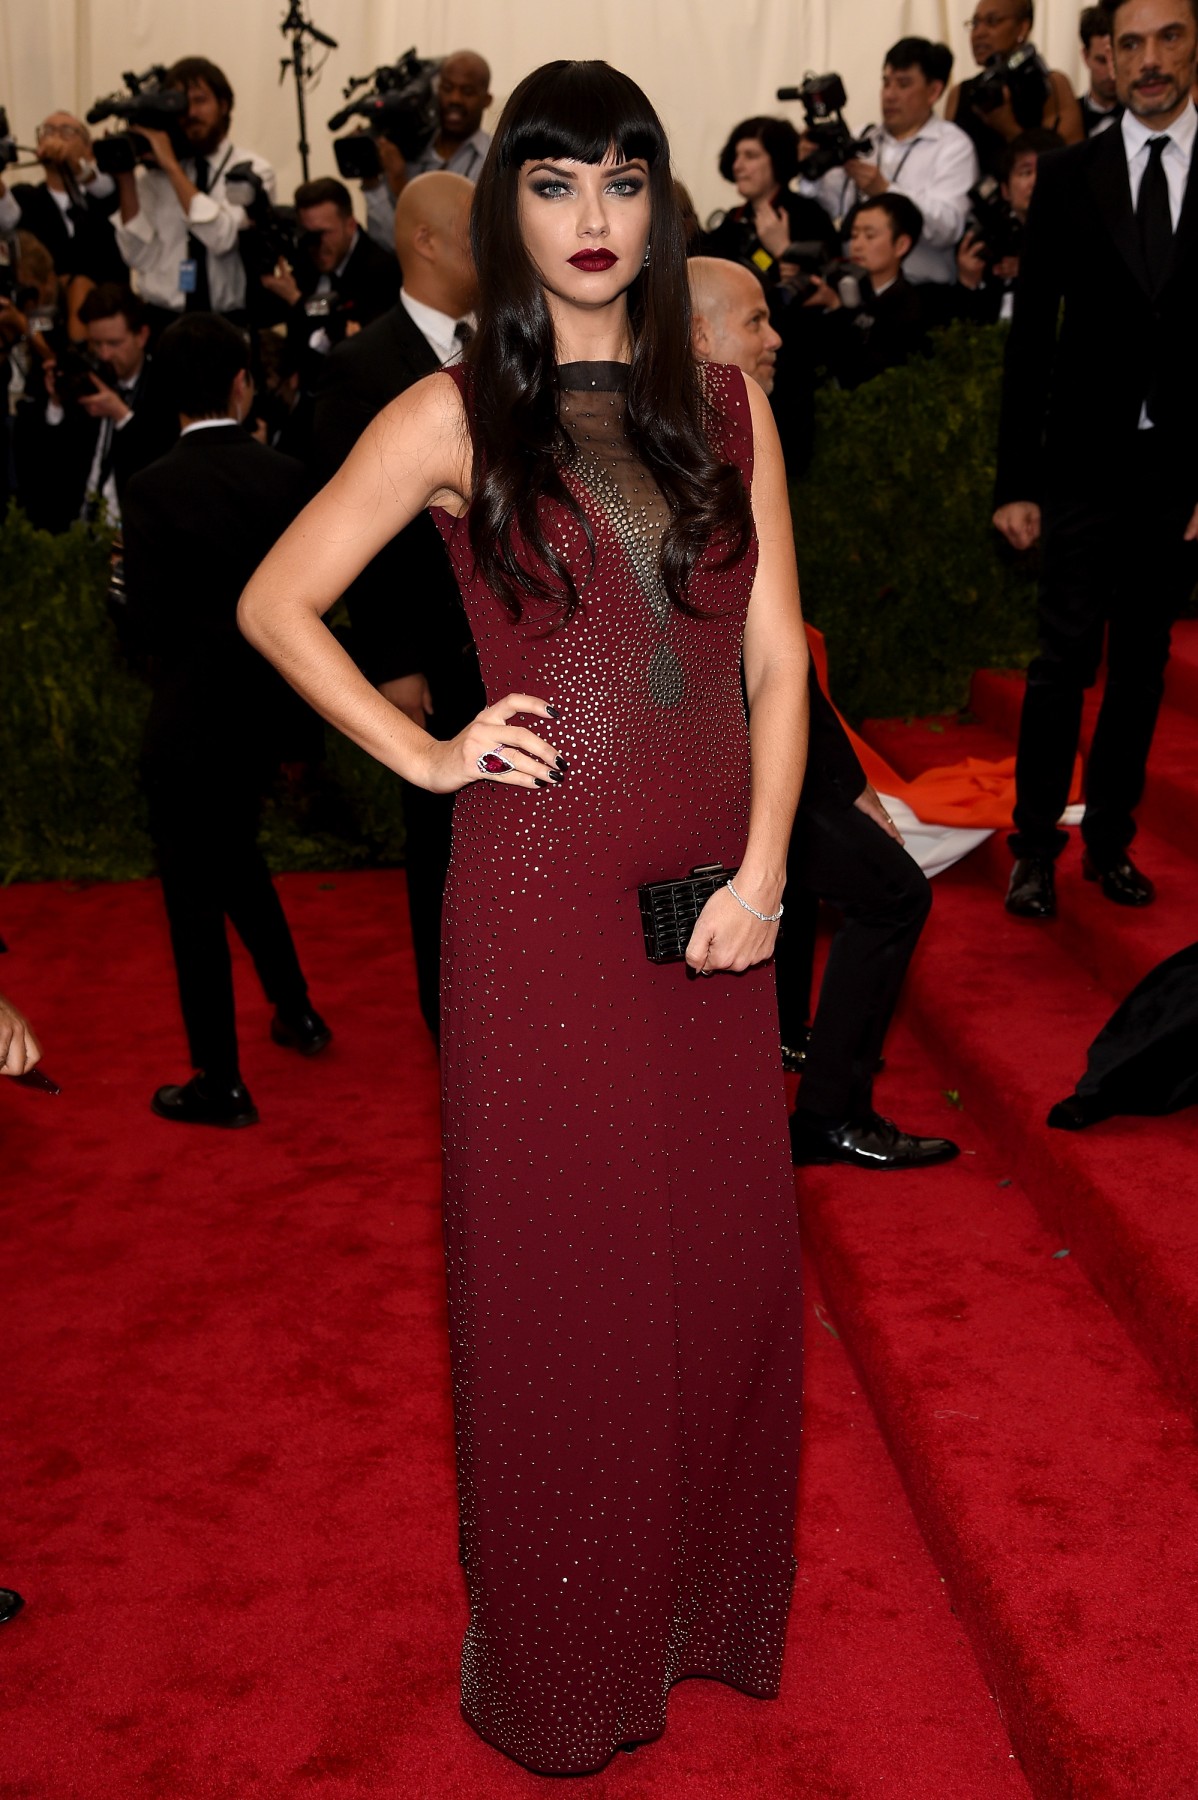 Adriana Lima wears Chopard to the Met Gala, New York, May 4th, 2015